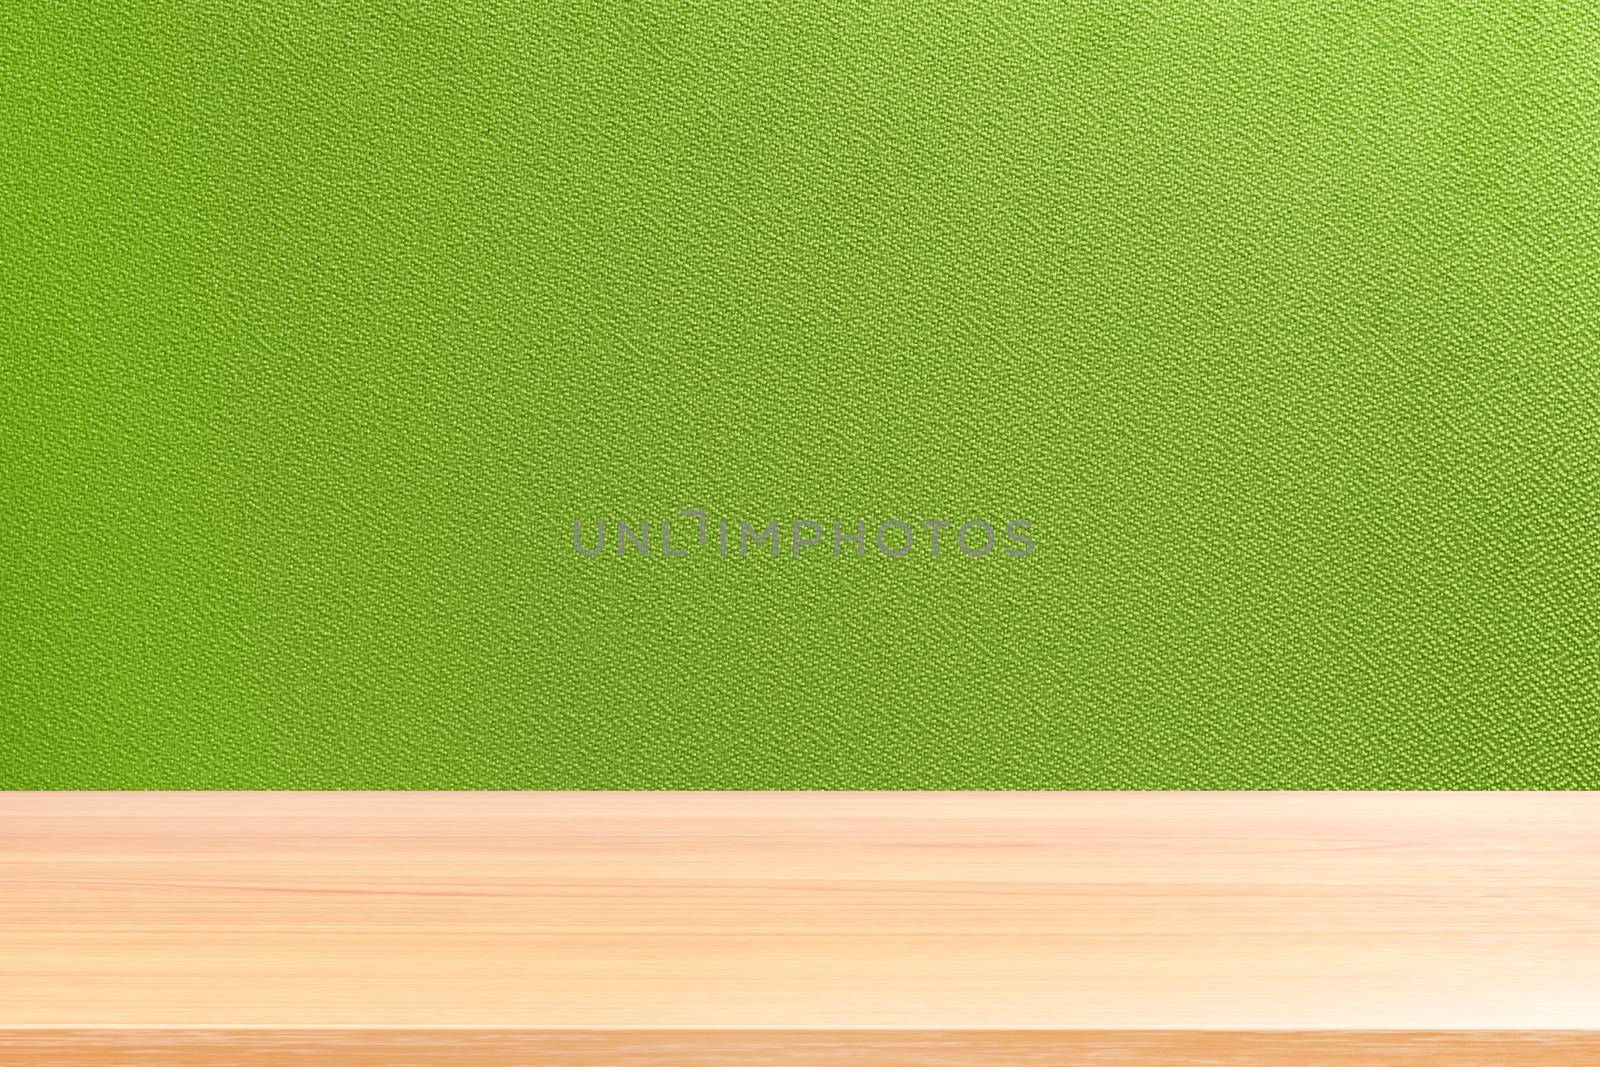 wood plank on green partition wall background, empty wood table floors on partition wall texture background, wood table board empty on partition wall for mock up display products by cgdeaw